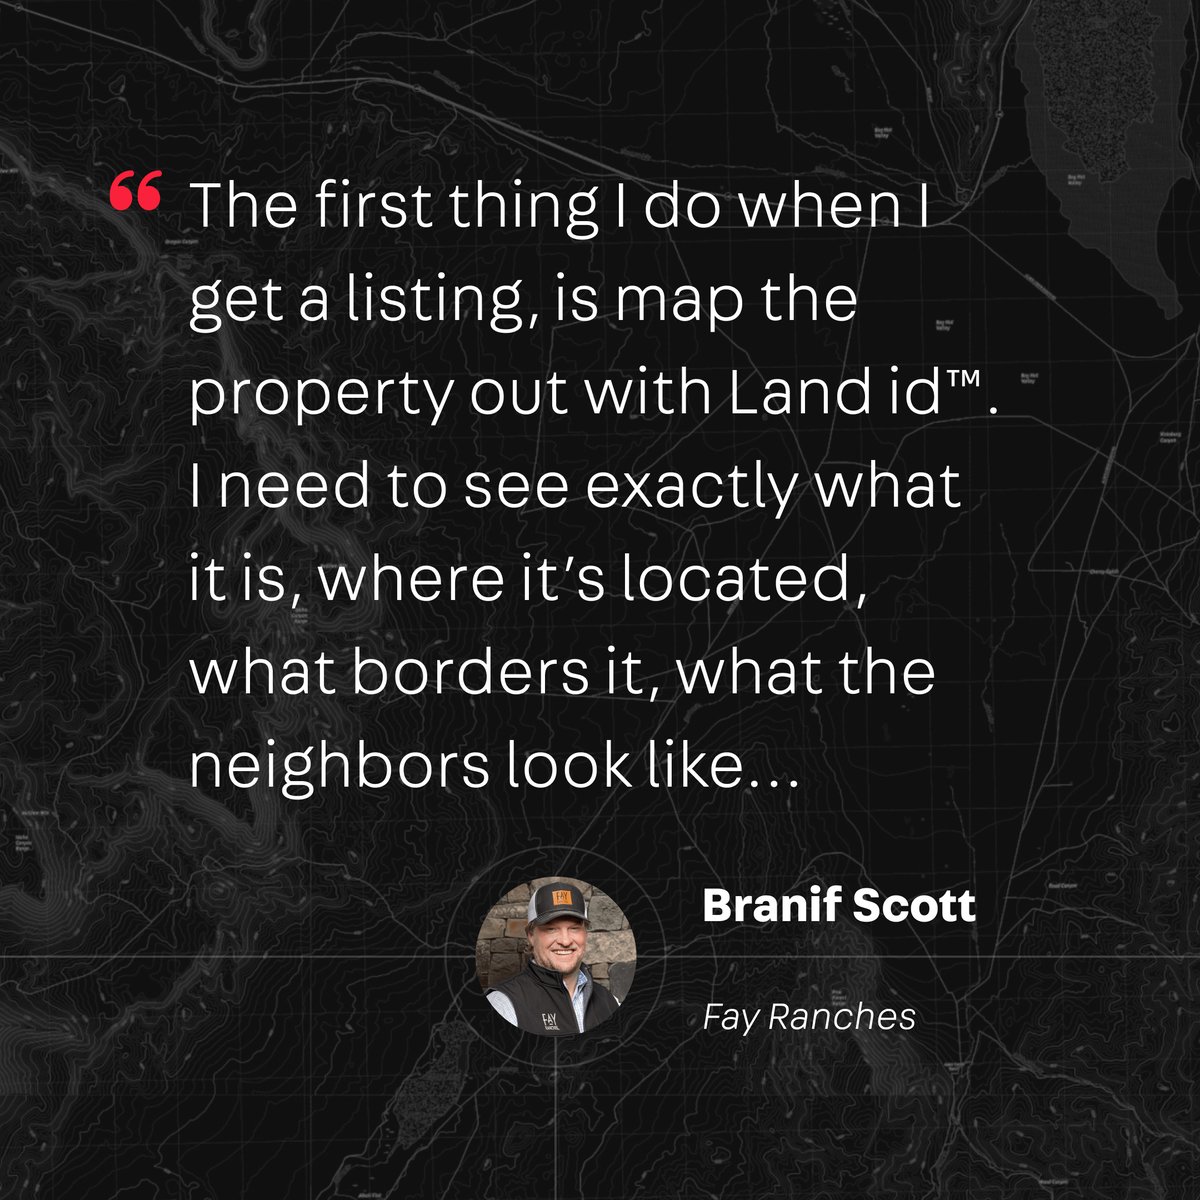 Branif Scott, Broker with Fay Ranches, when asked about his process for preparing listings... 

#propertymapping #landidentity #property #realestate #mobileapp #propertyboundaries #propertyinfo #parcel #mapping #maps #mobilemapping #map #parceldata #propertyinformation #landid=